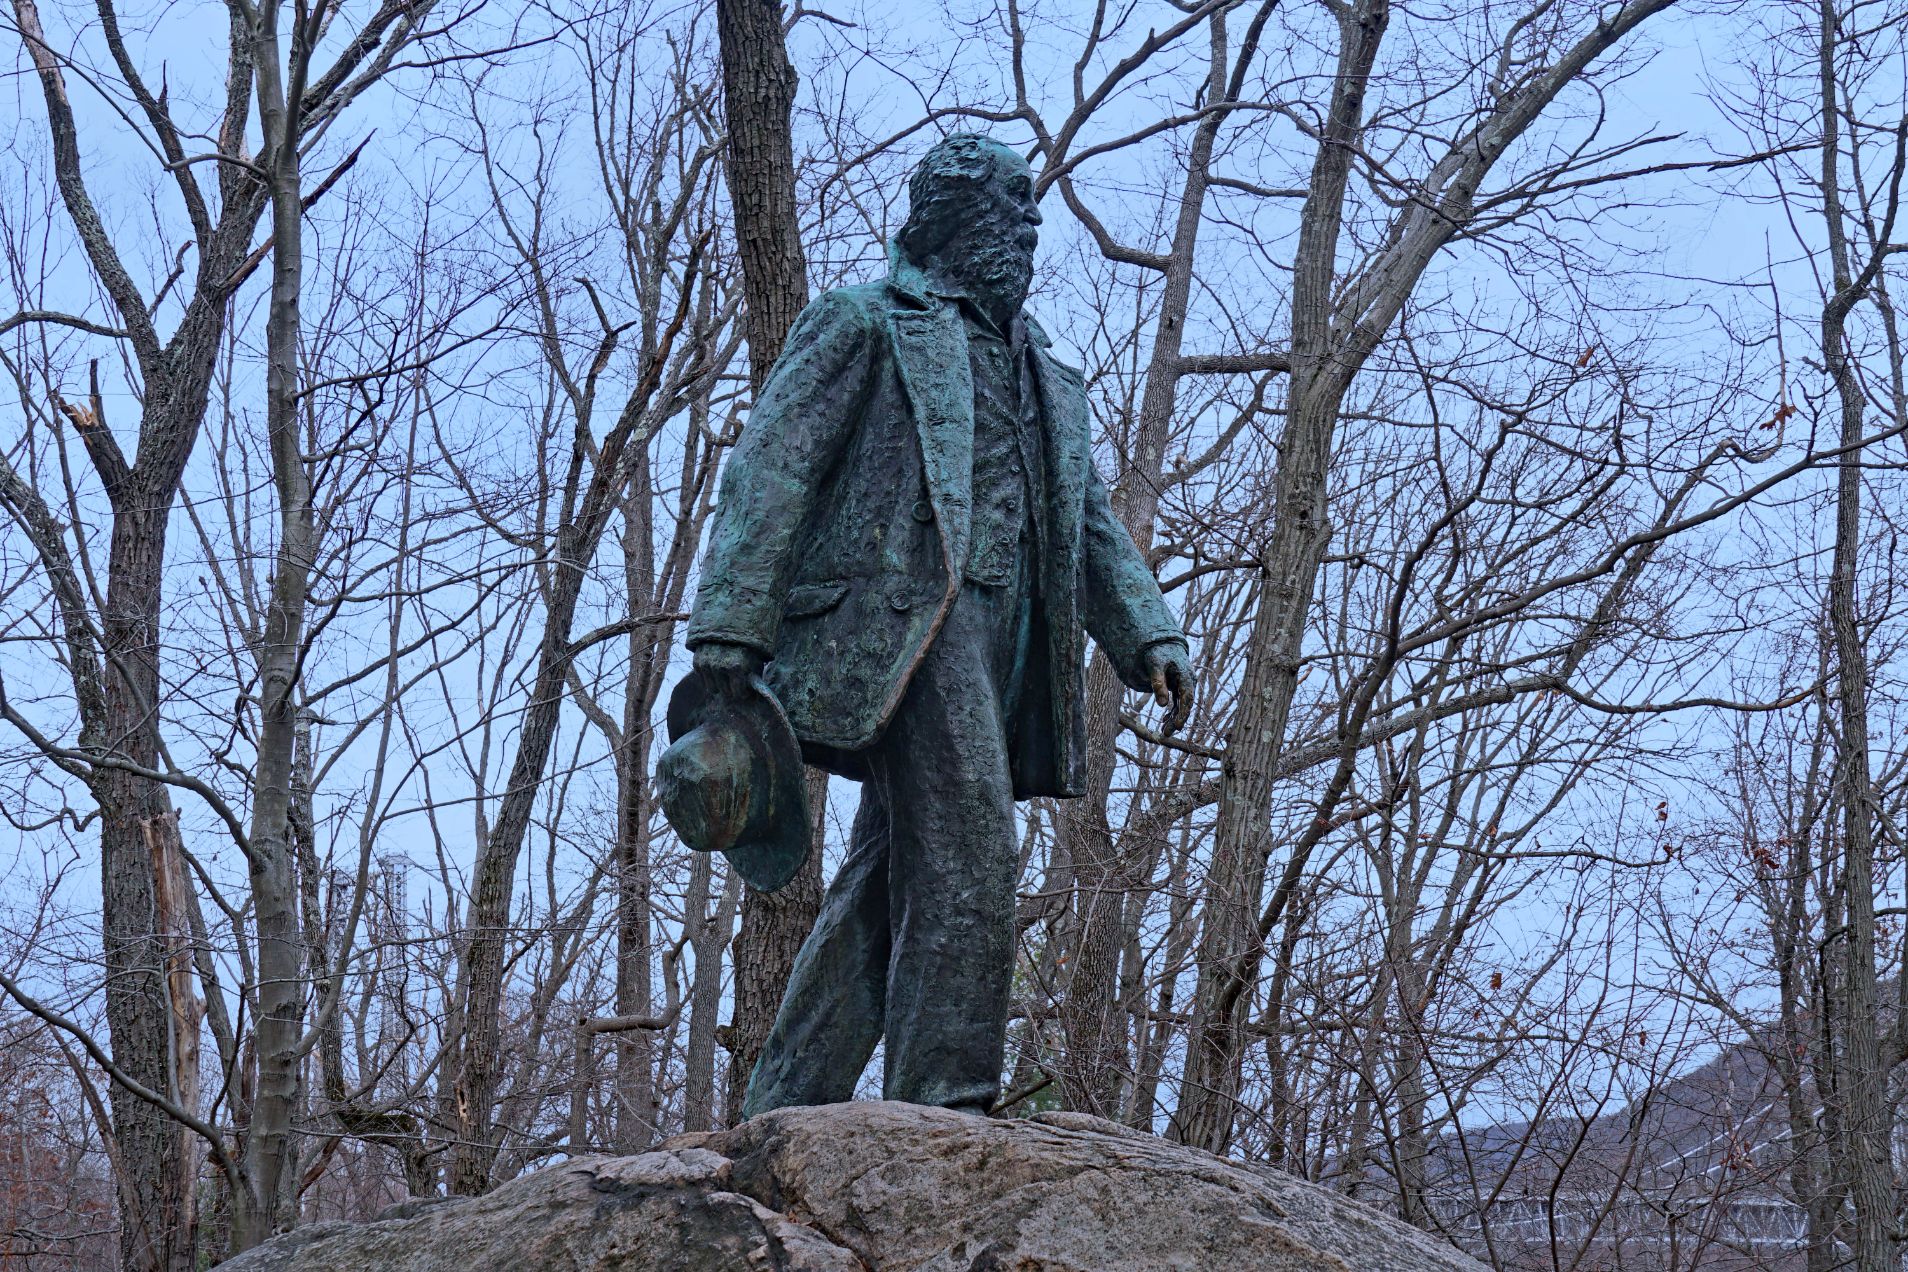 New York State - December 30, 2020: Lifelike bronze statue of great American poet Walt Whitman atop a boulder on the AppalachianTrail in Bear Mountain State Park.